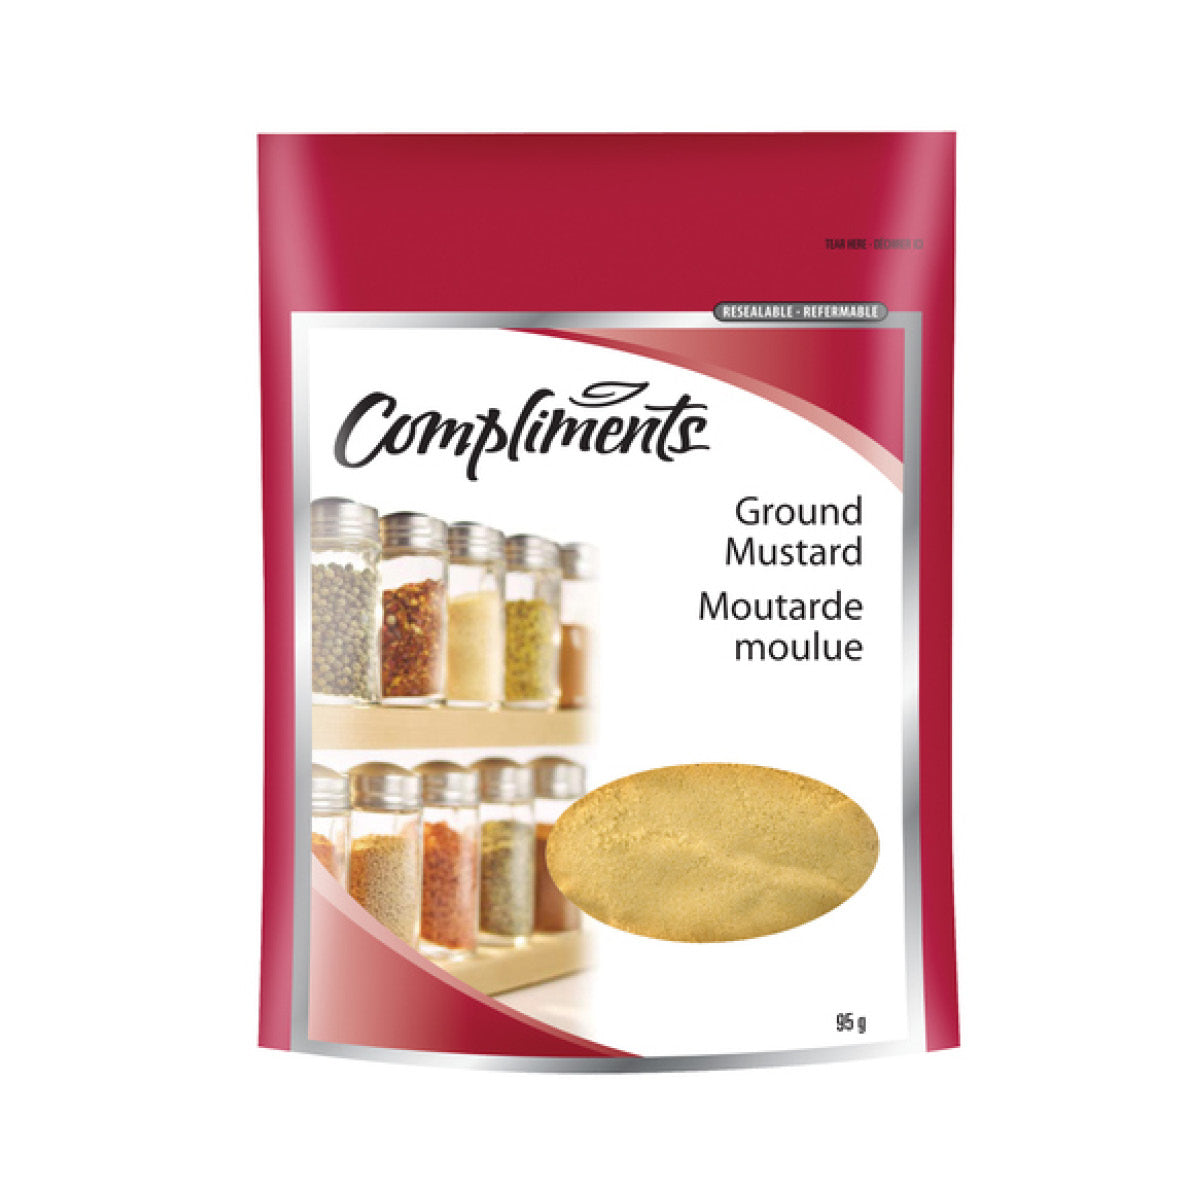 Compliments Ground Mustard, 95G